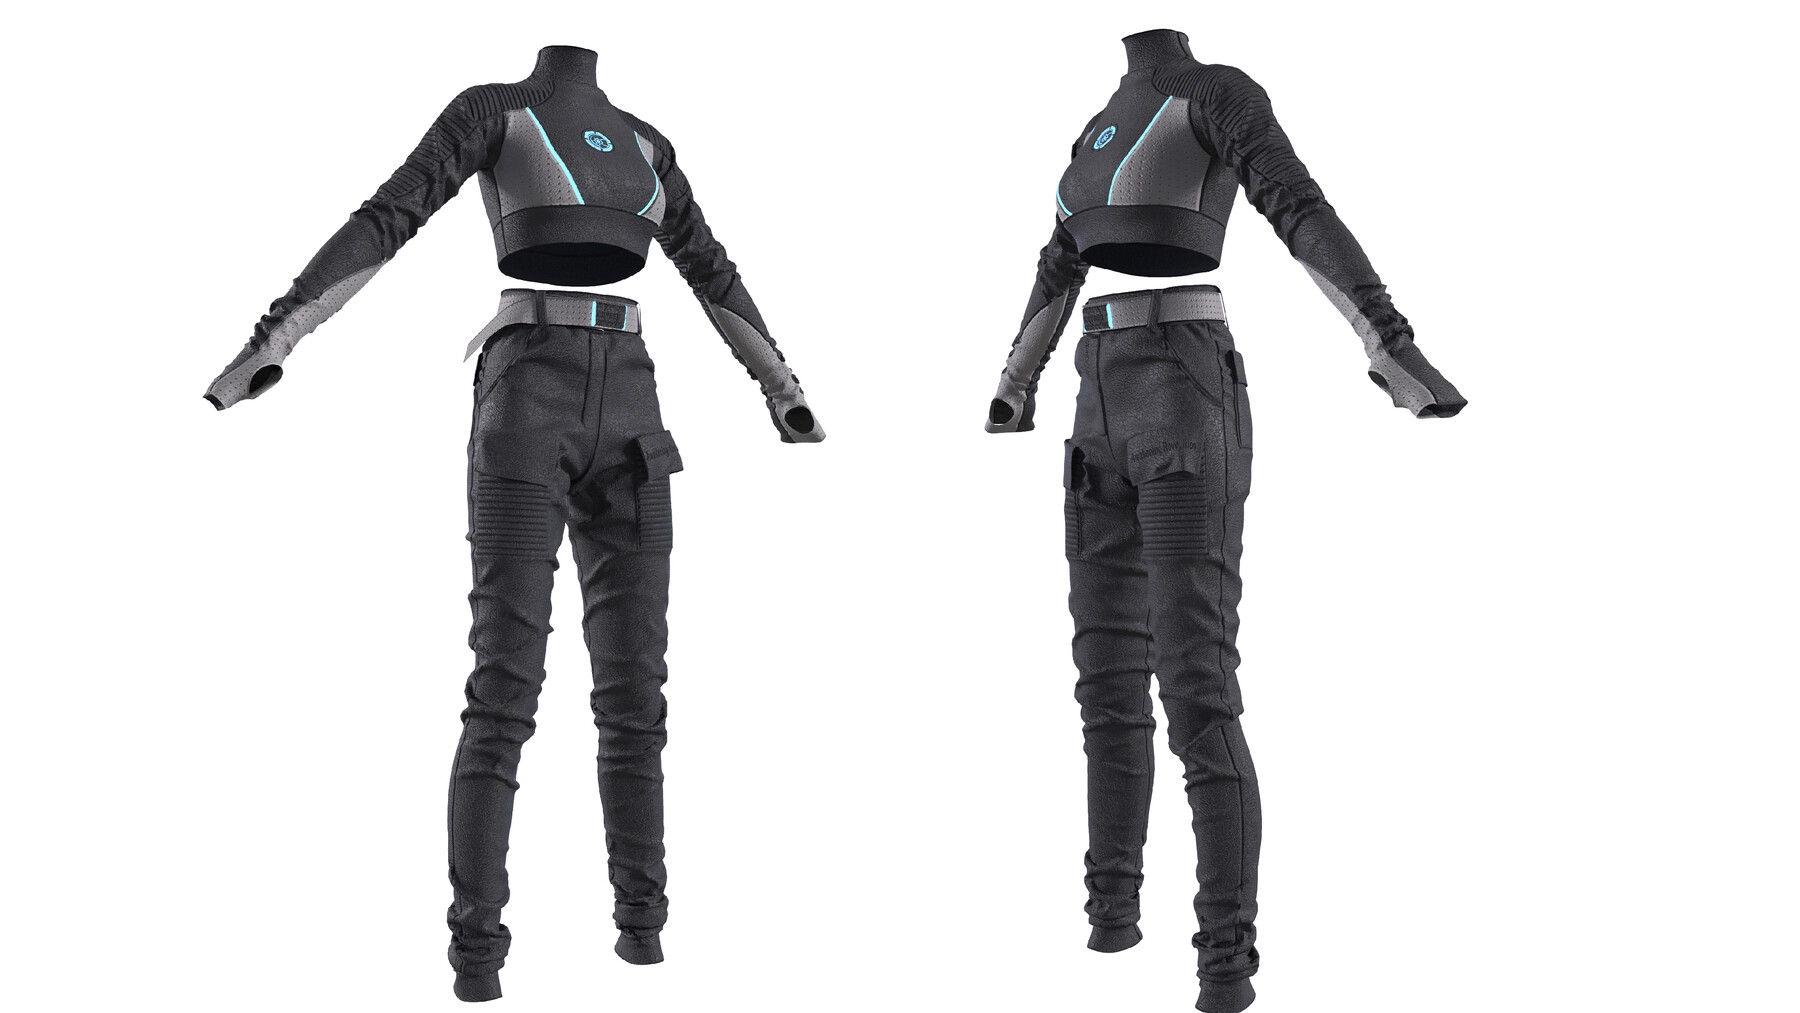 ArtStation - Scifi futuristic girl outfit | Resources